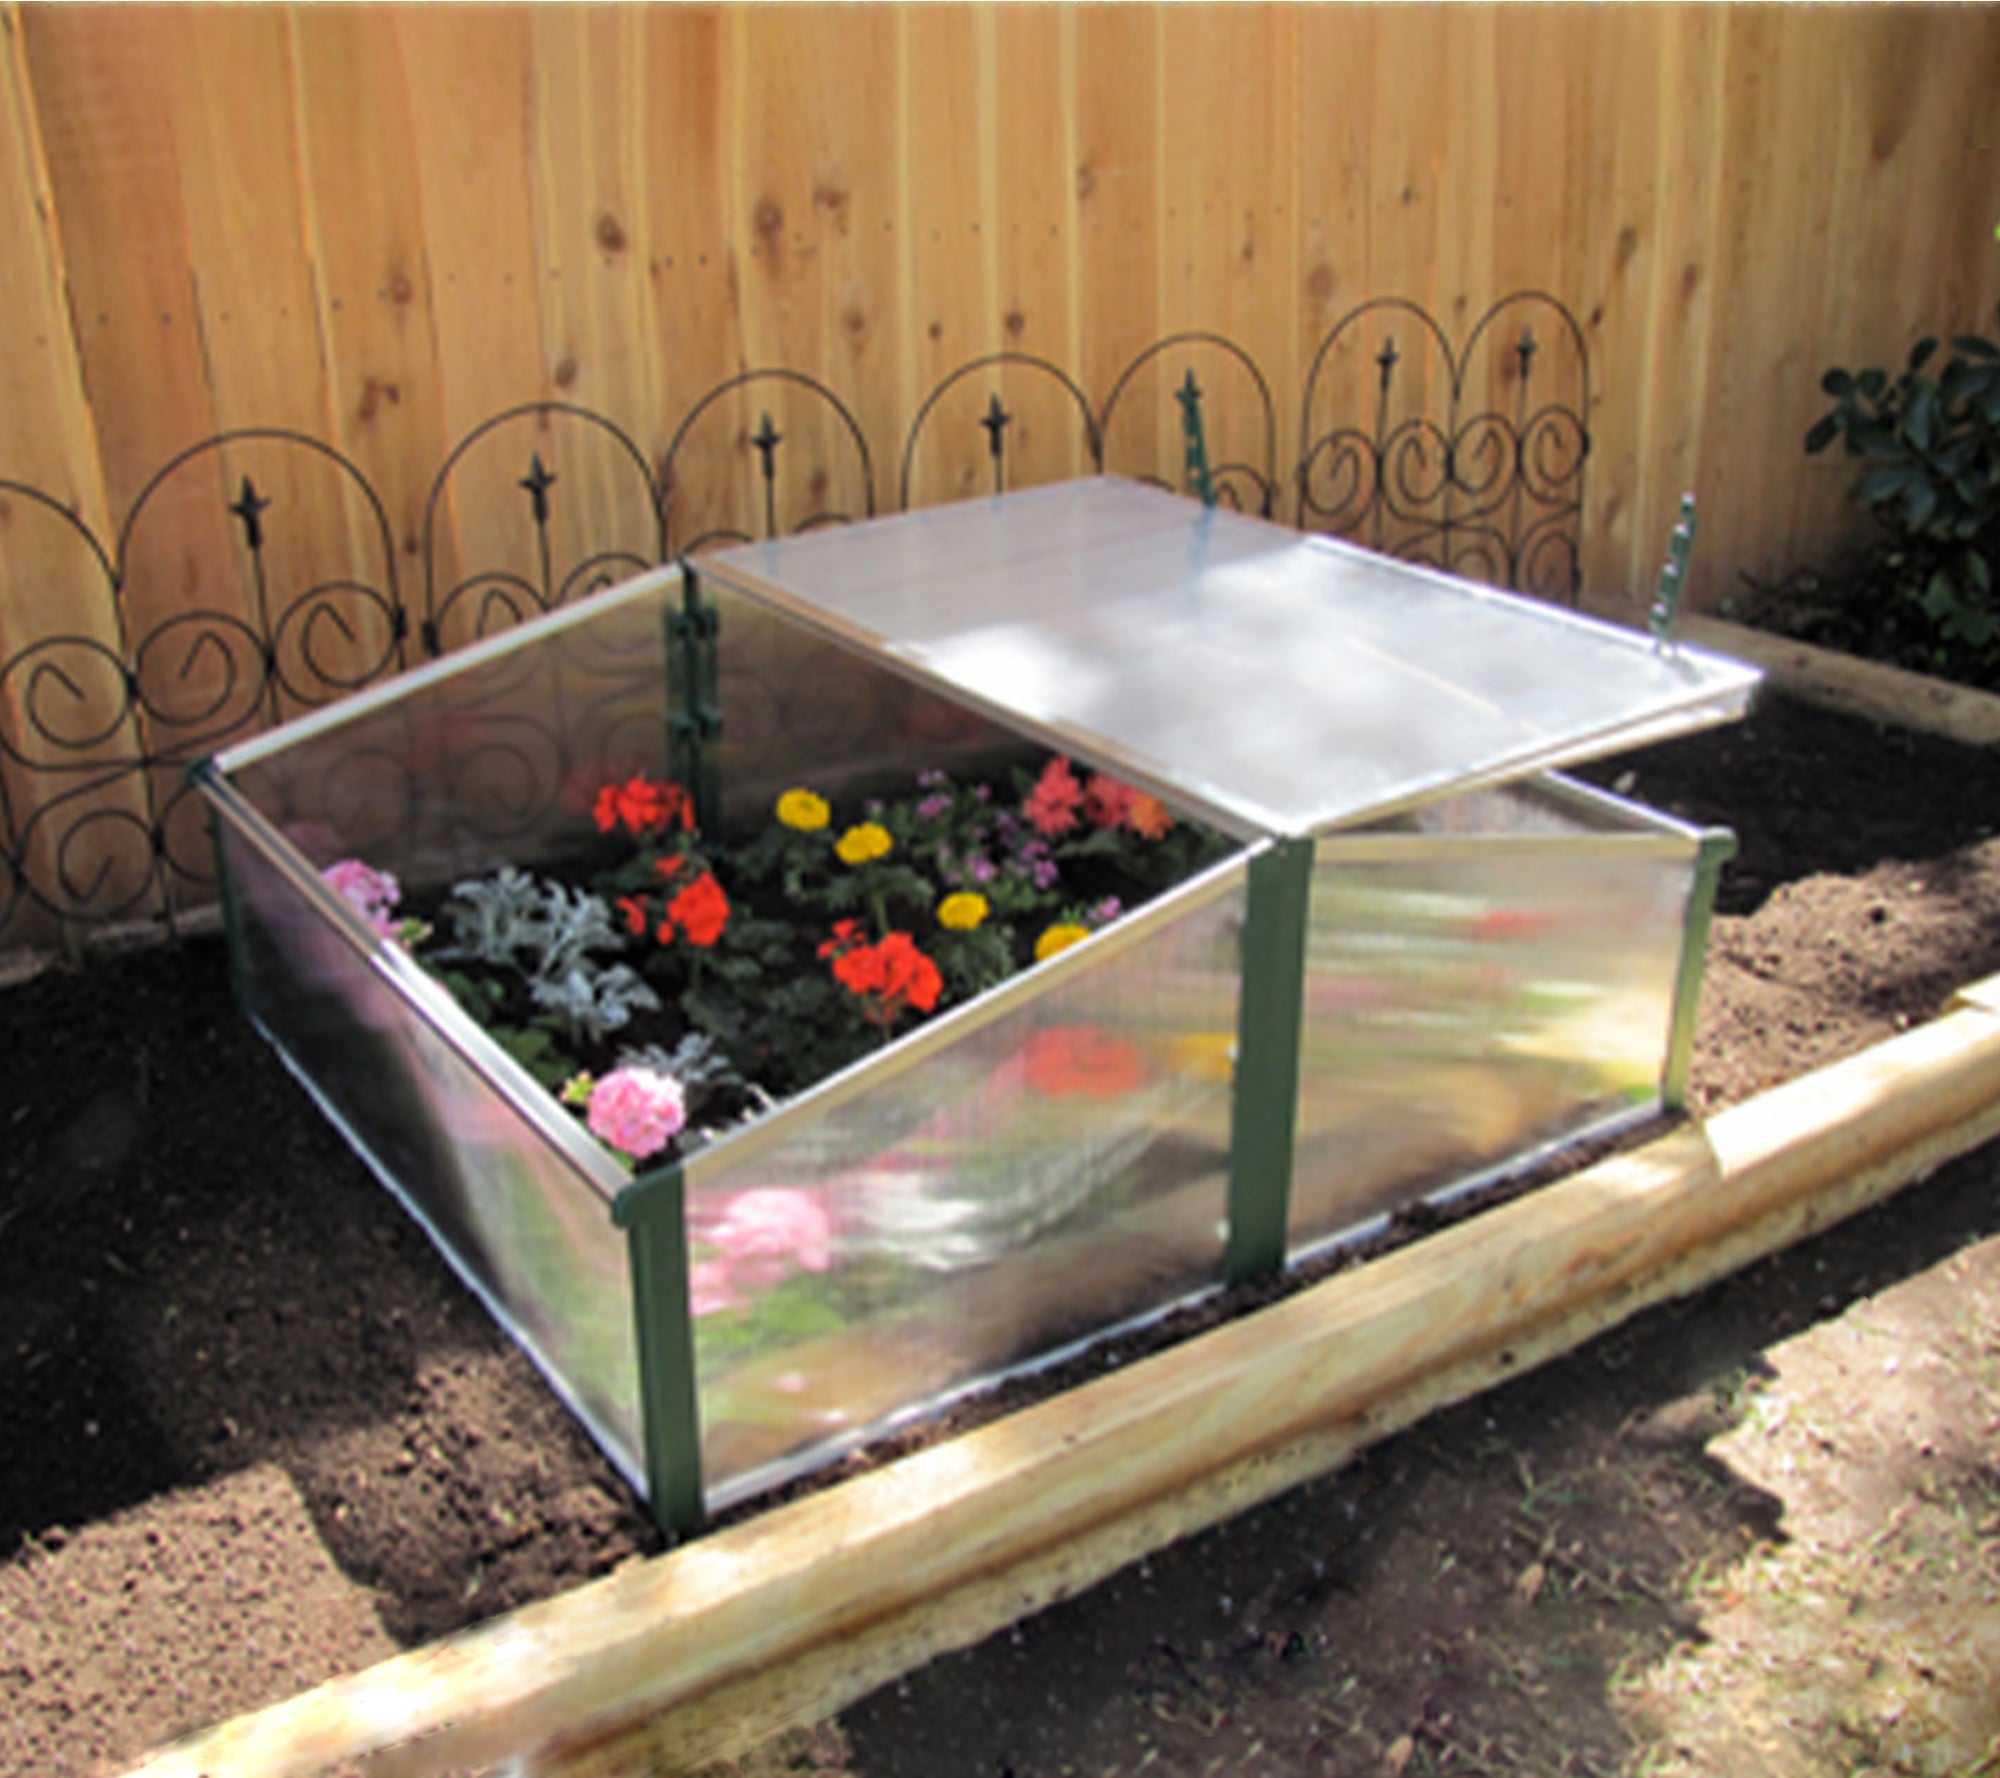 Easy-Fix Double Cold Frame